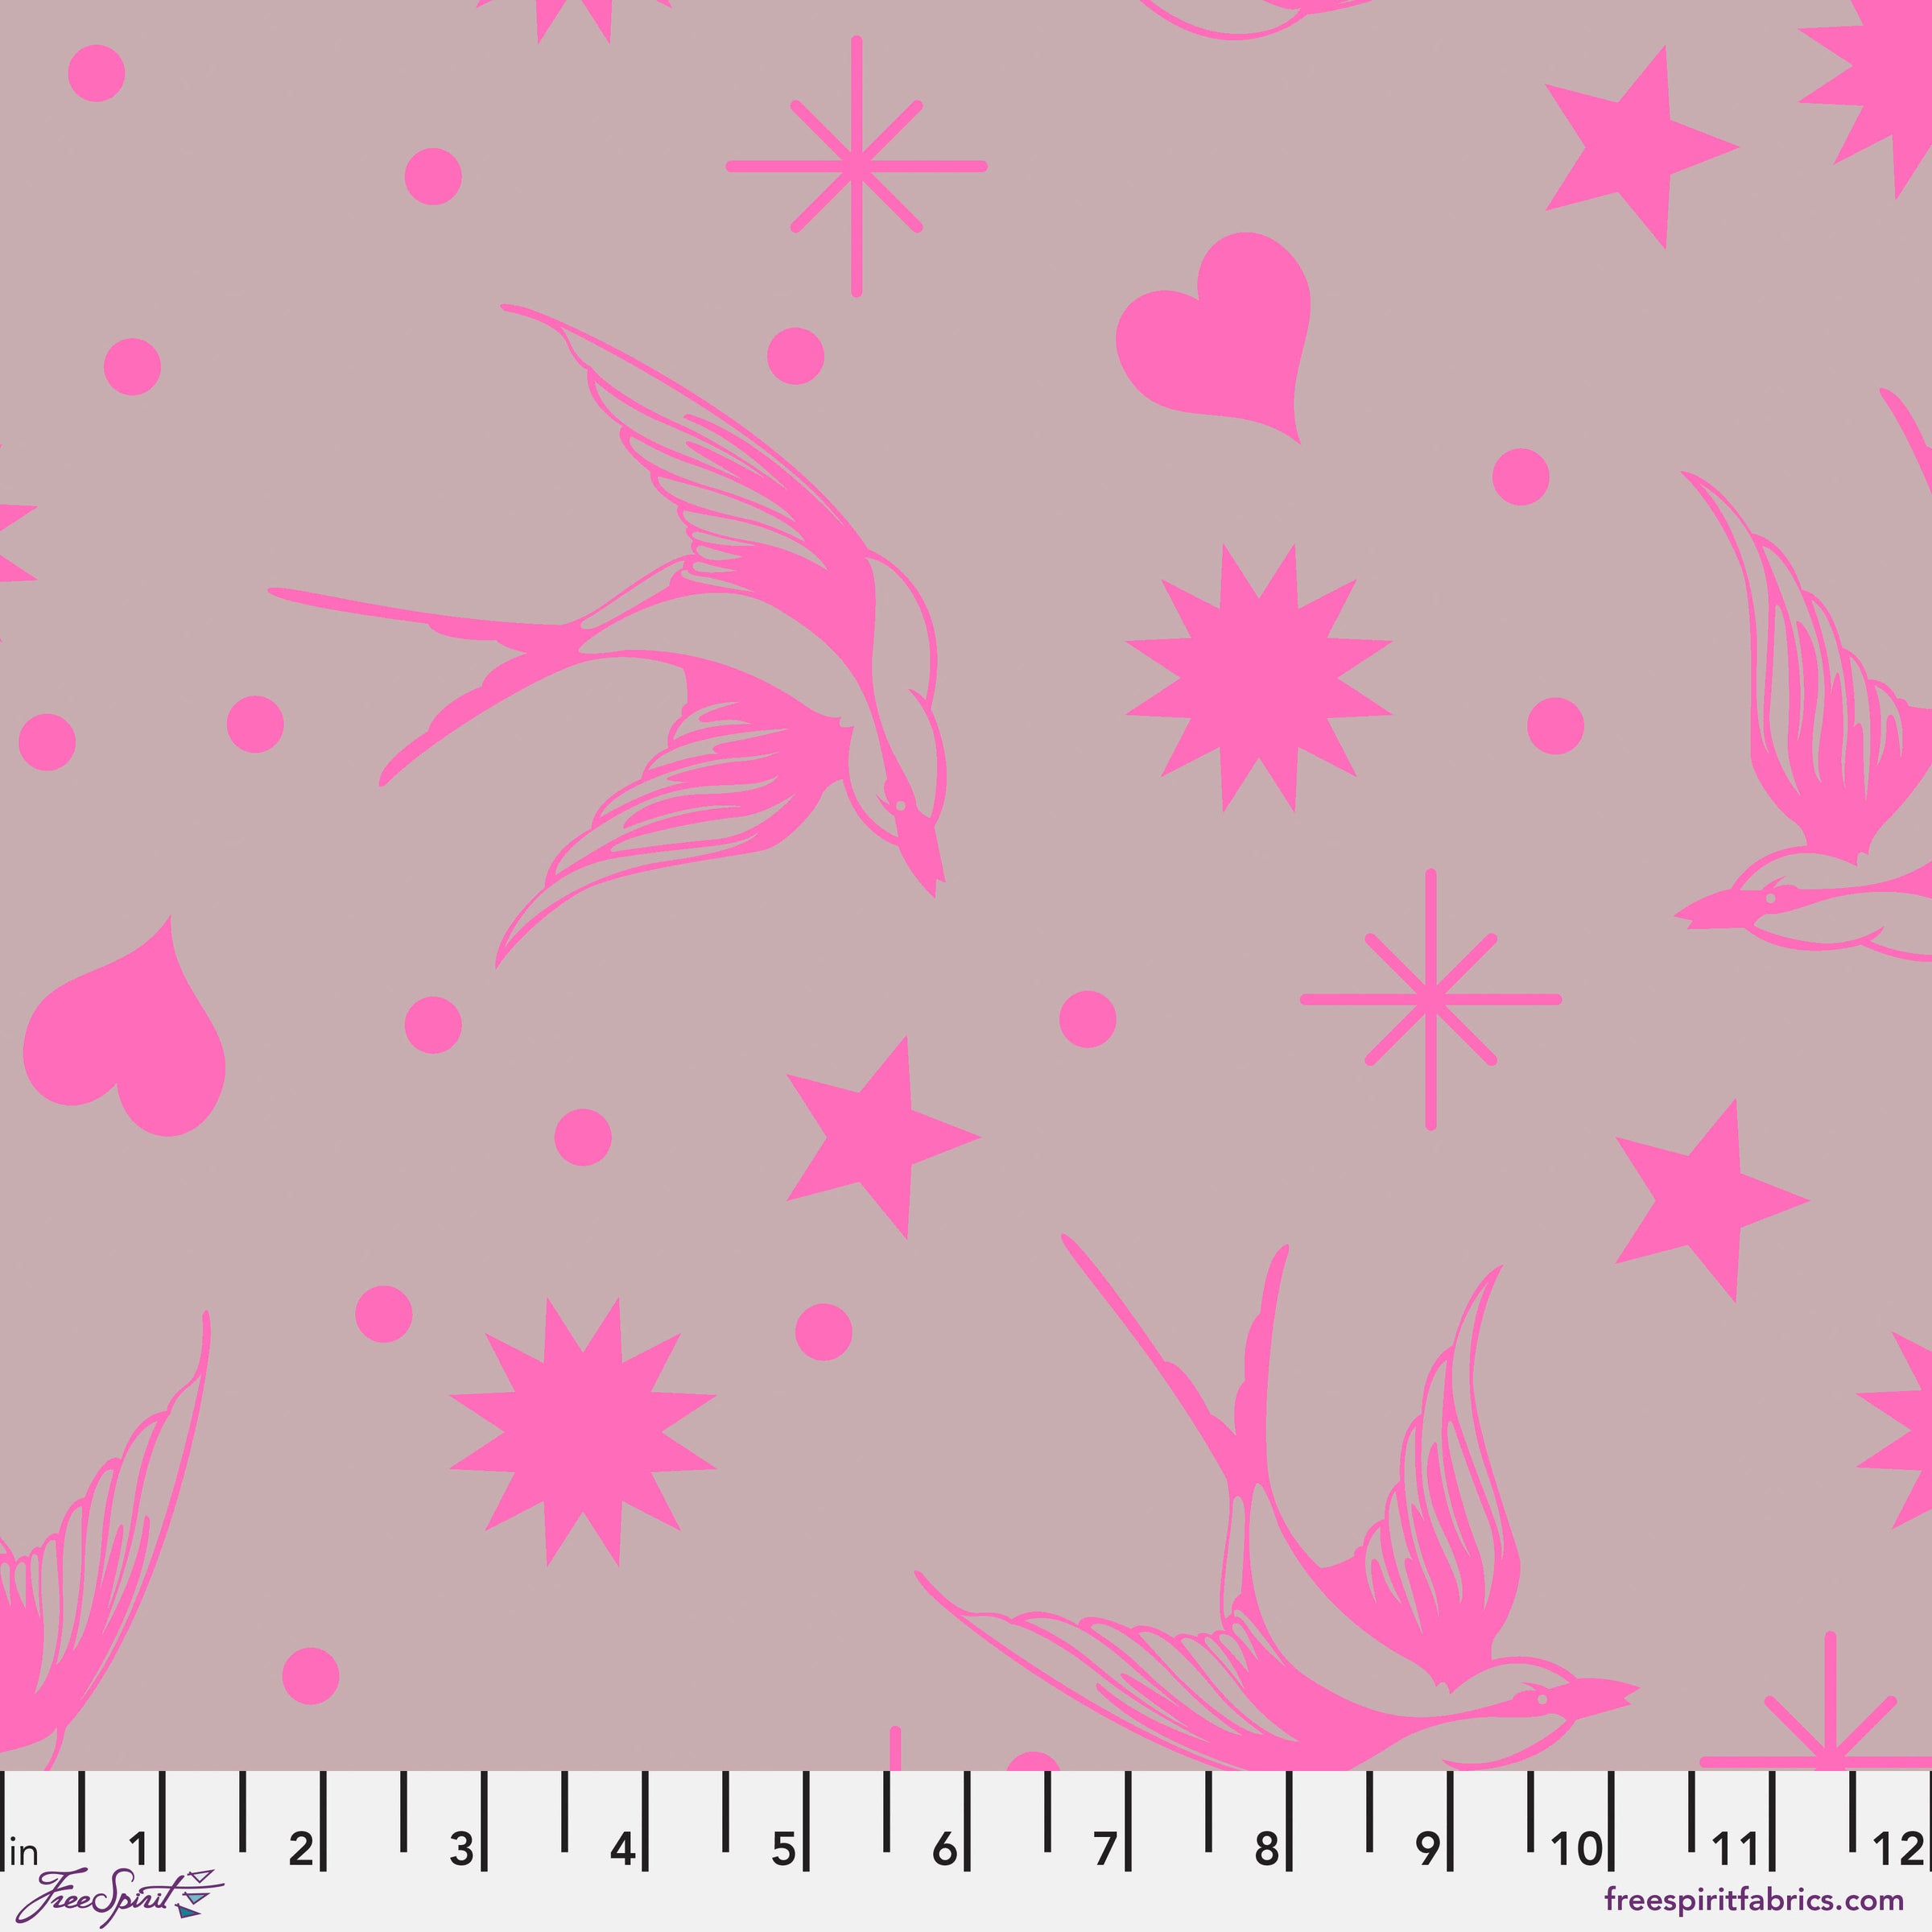 Everglow Quilt Fabric by Tula Pink - Neon Fairy Flakes in Cosmic Pink - PWTP157.COSMIC